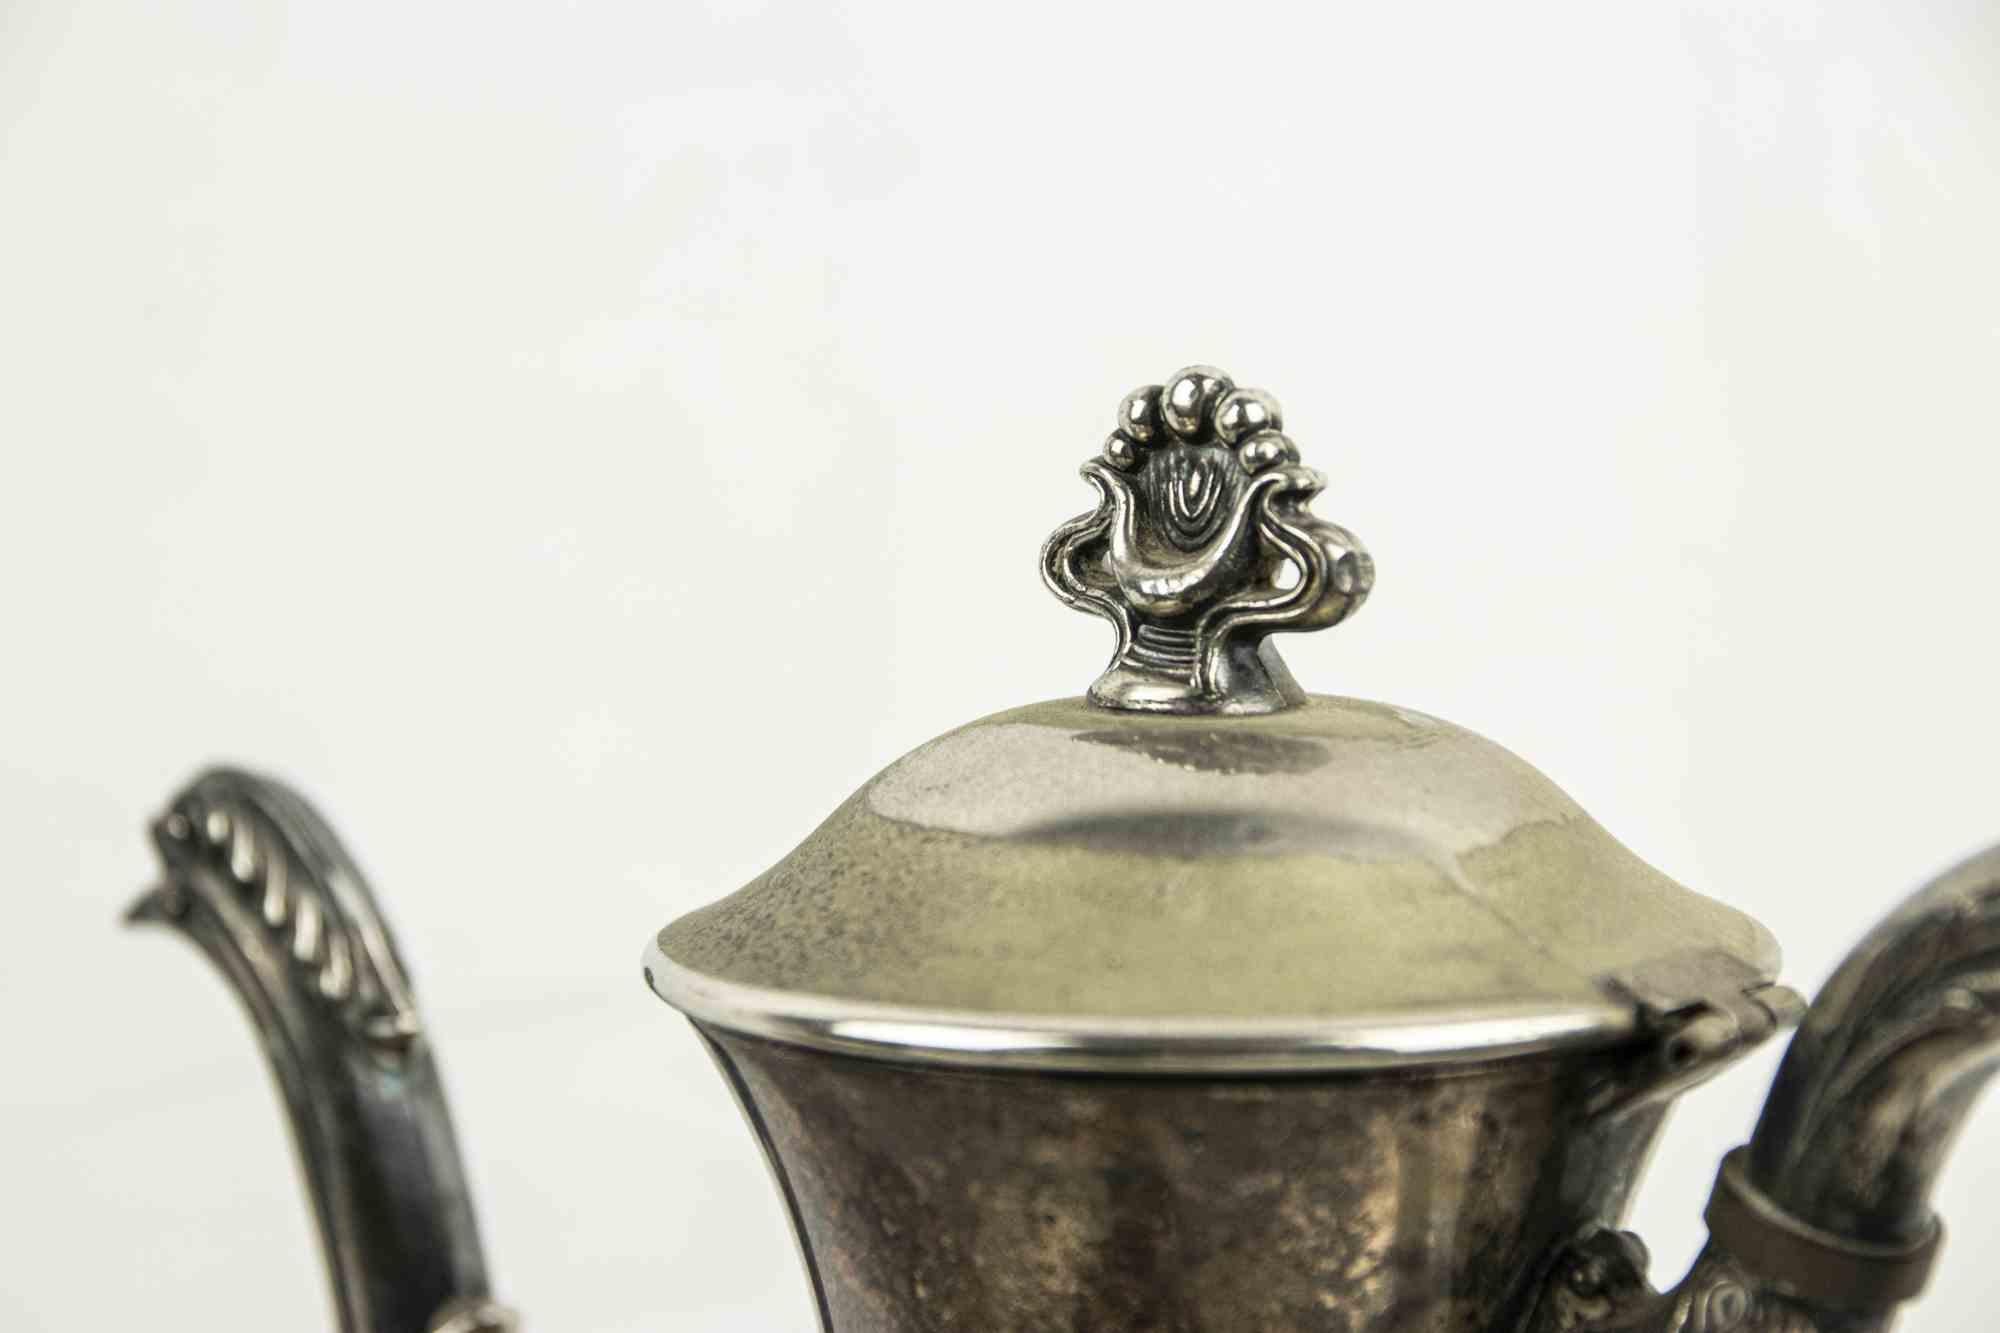 Silver tea service is an original silverware item realized by Italian Manufacturer in ther Early 20th Century

A silver set composed by three teapot and two little bowls.

Fair conditions

Dimensions:

Teapot 1: 24 x 26 cm

Teapot 2: 15 x 30

Teapot